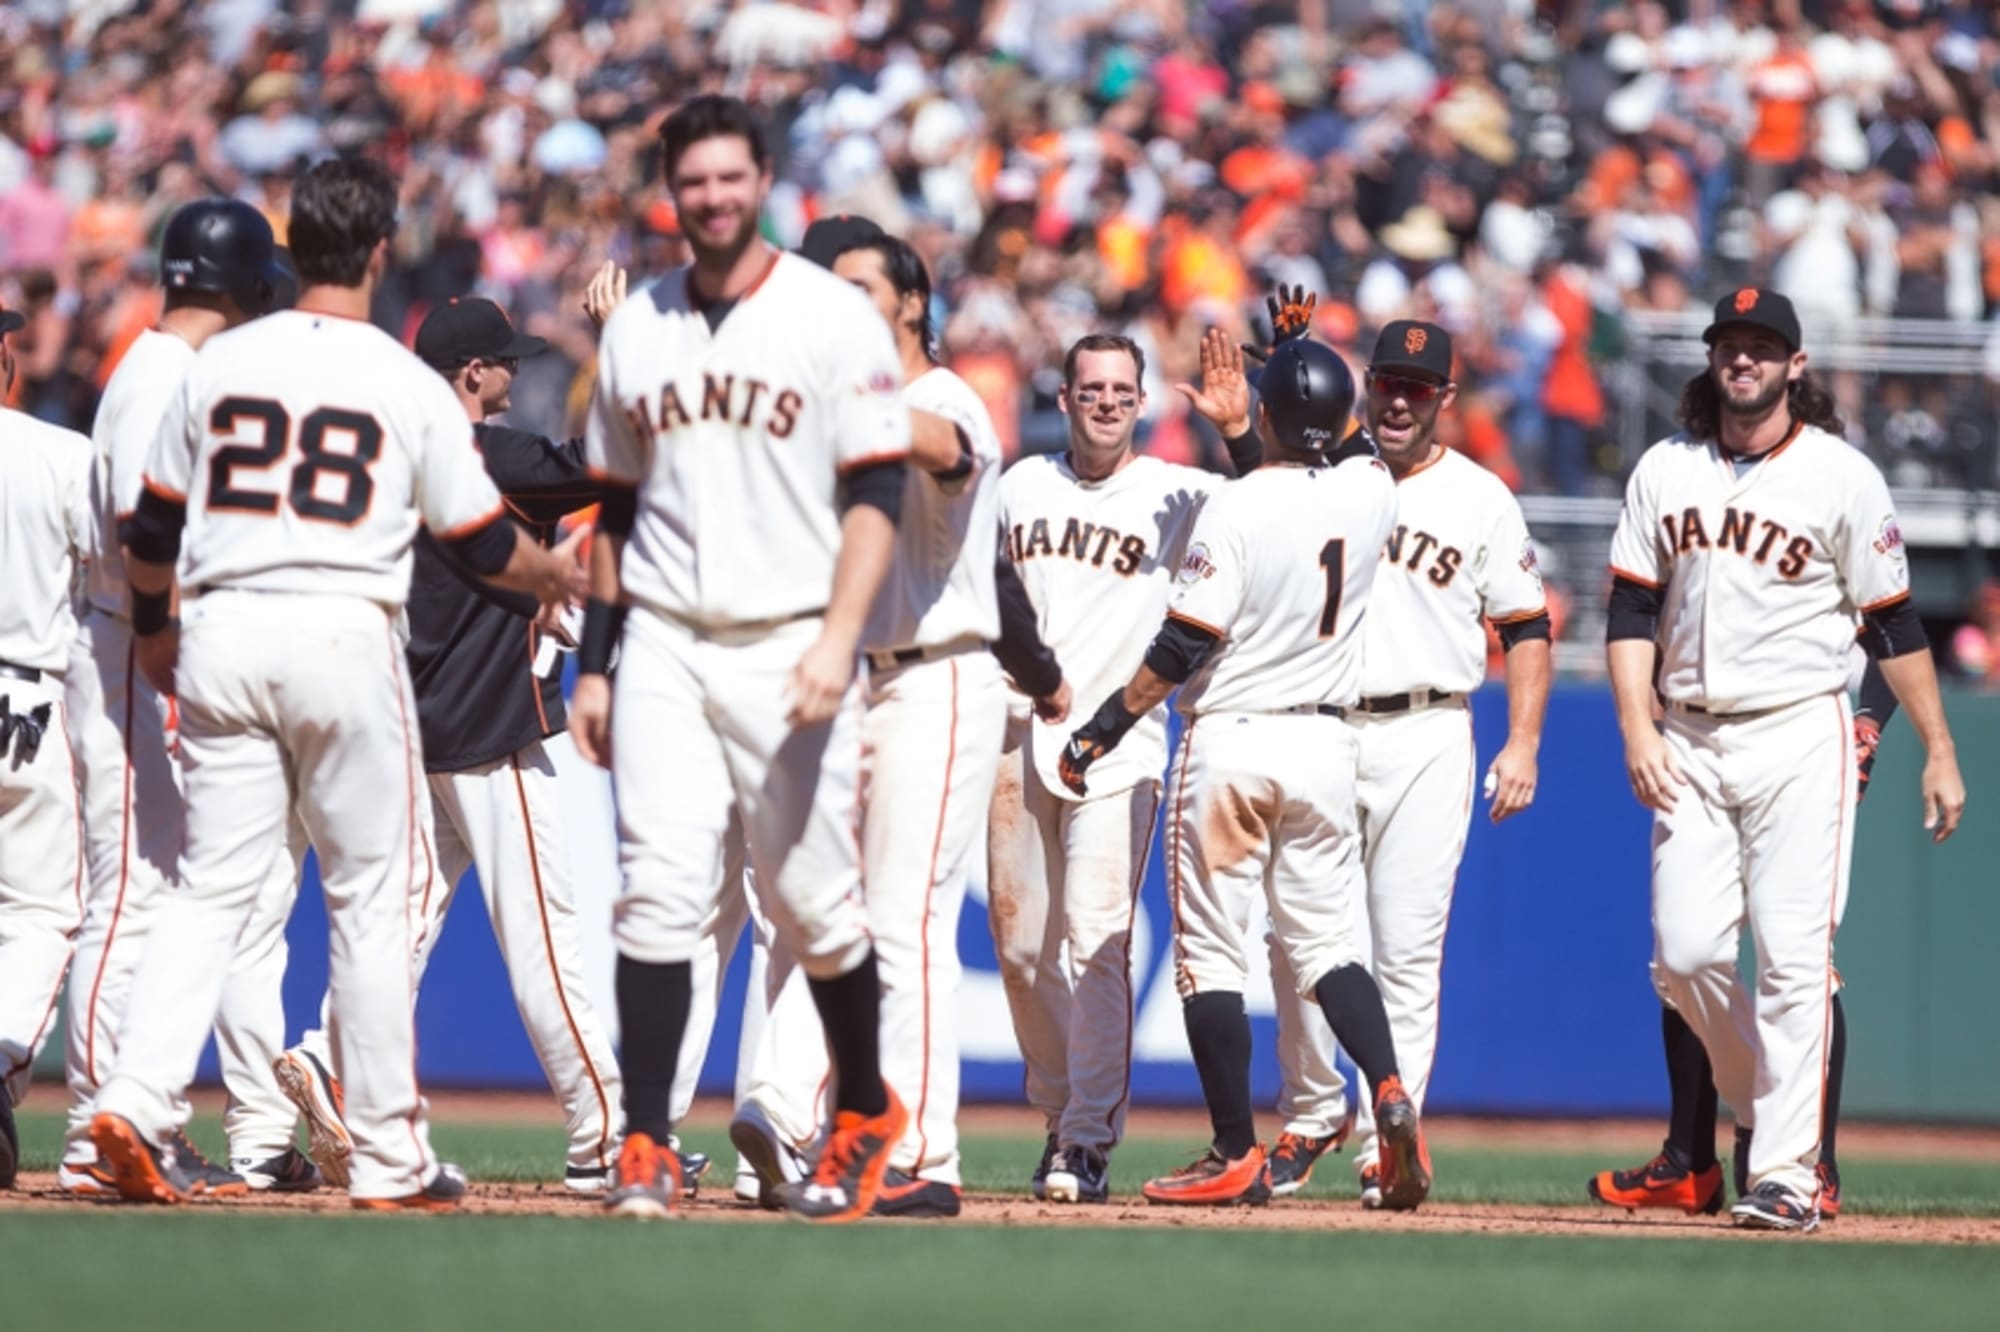 Phillies Fight, but Giants Walkoff Winners